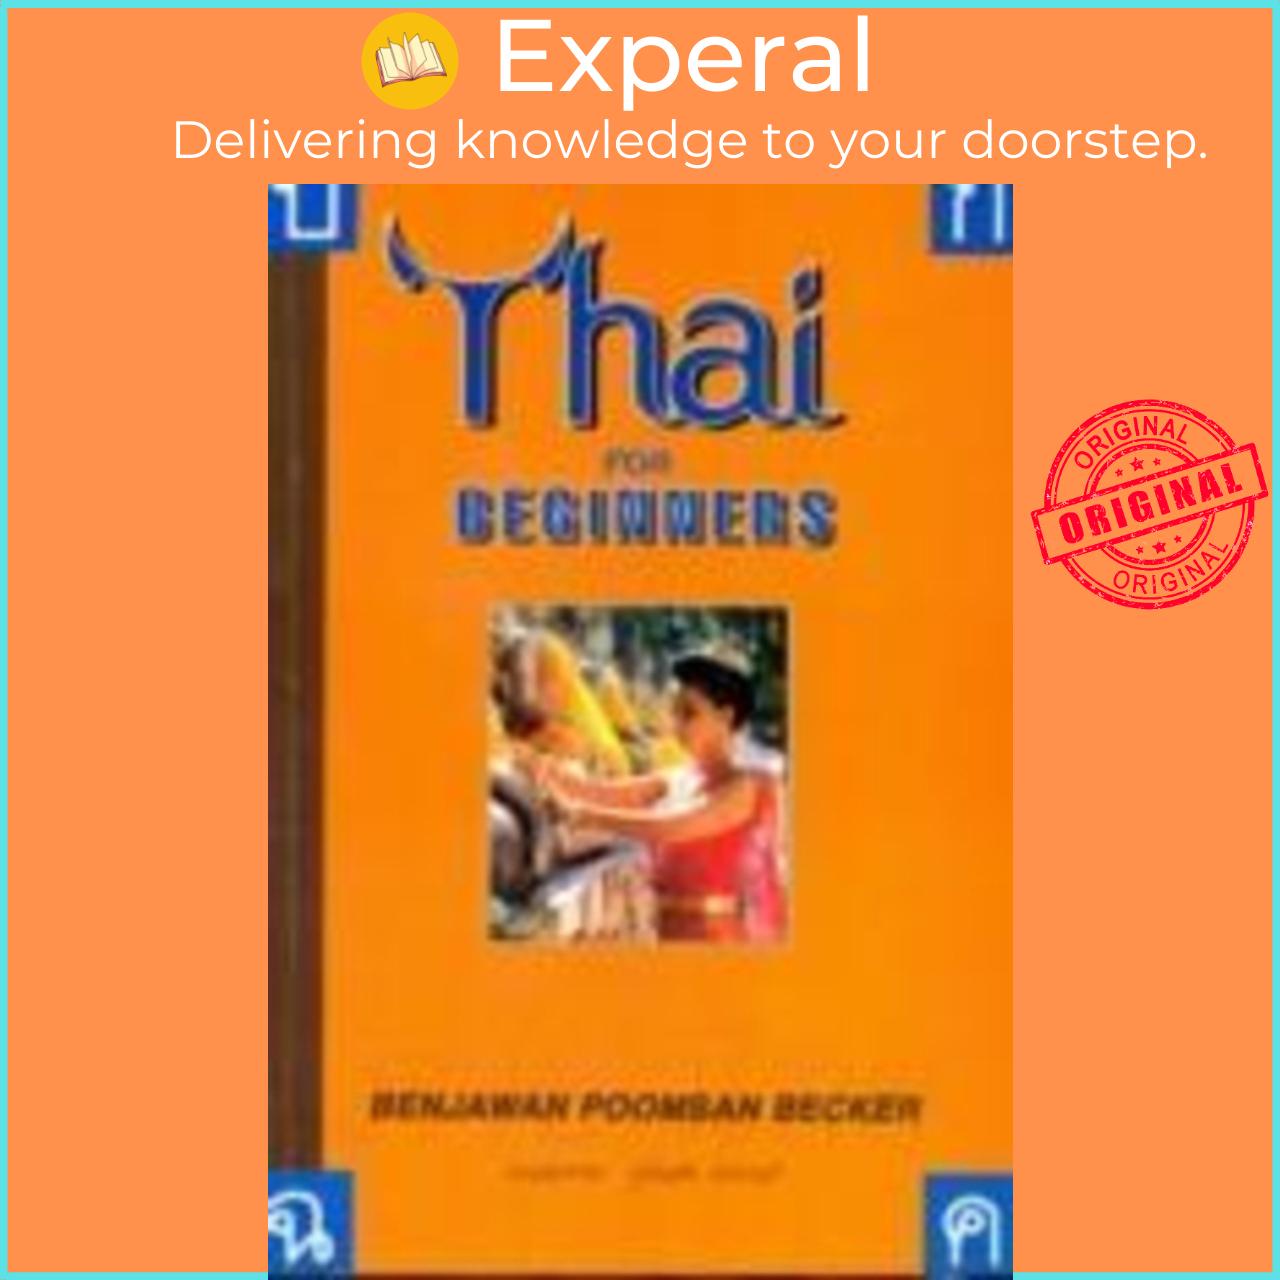 Sách - Thai for Beginners by Benjawan Poomsan Becker (US edition, paperback)